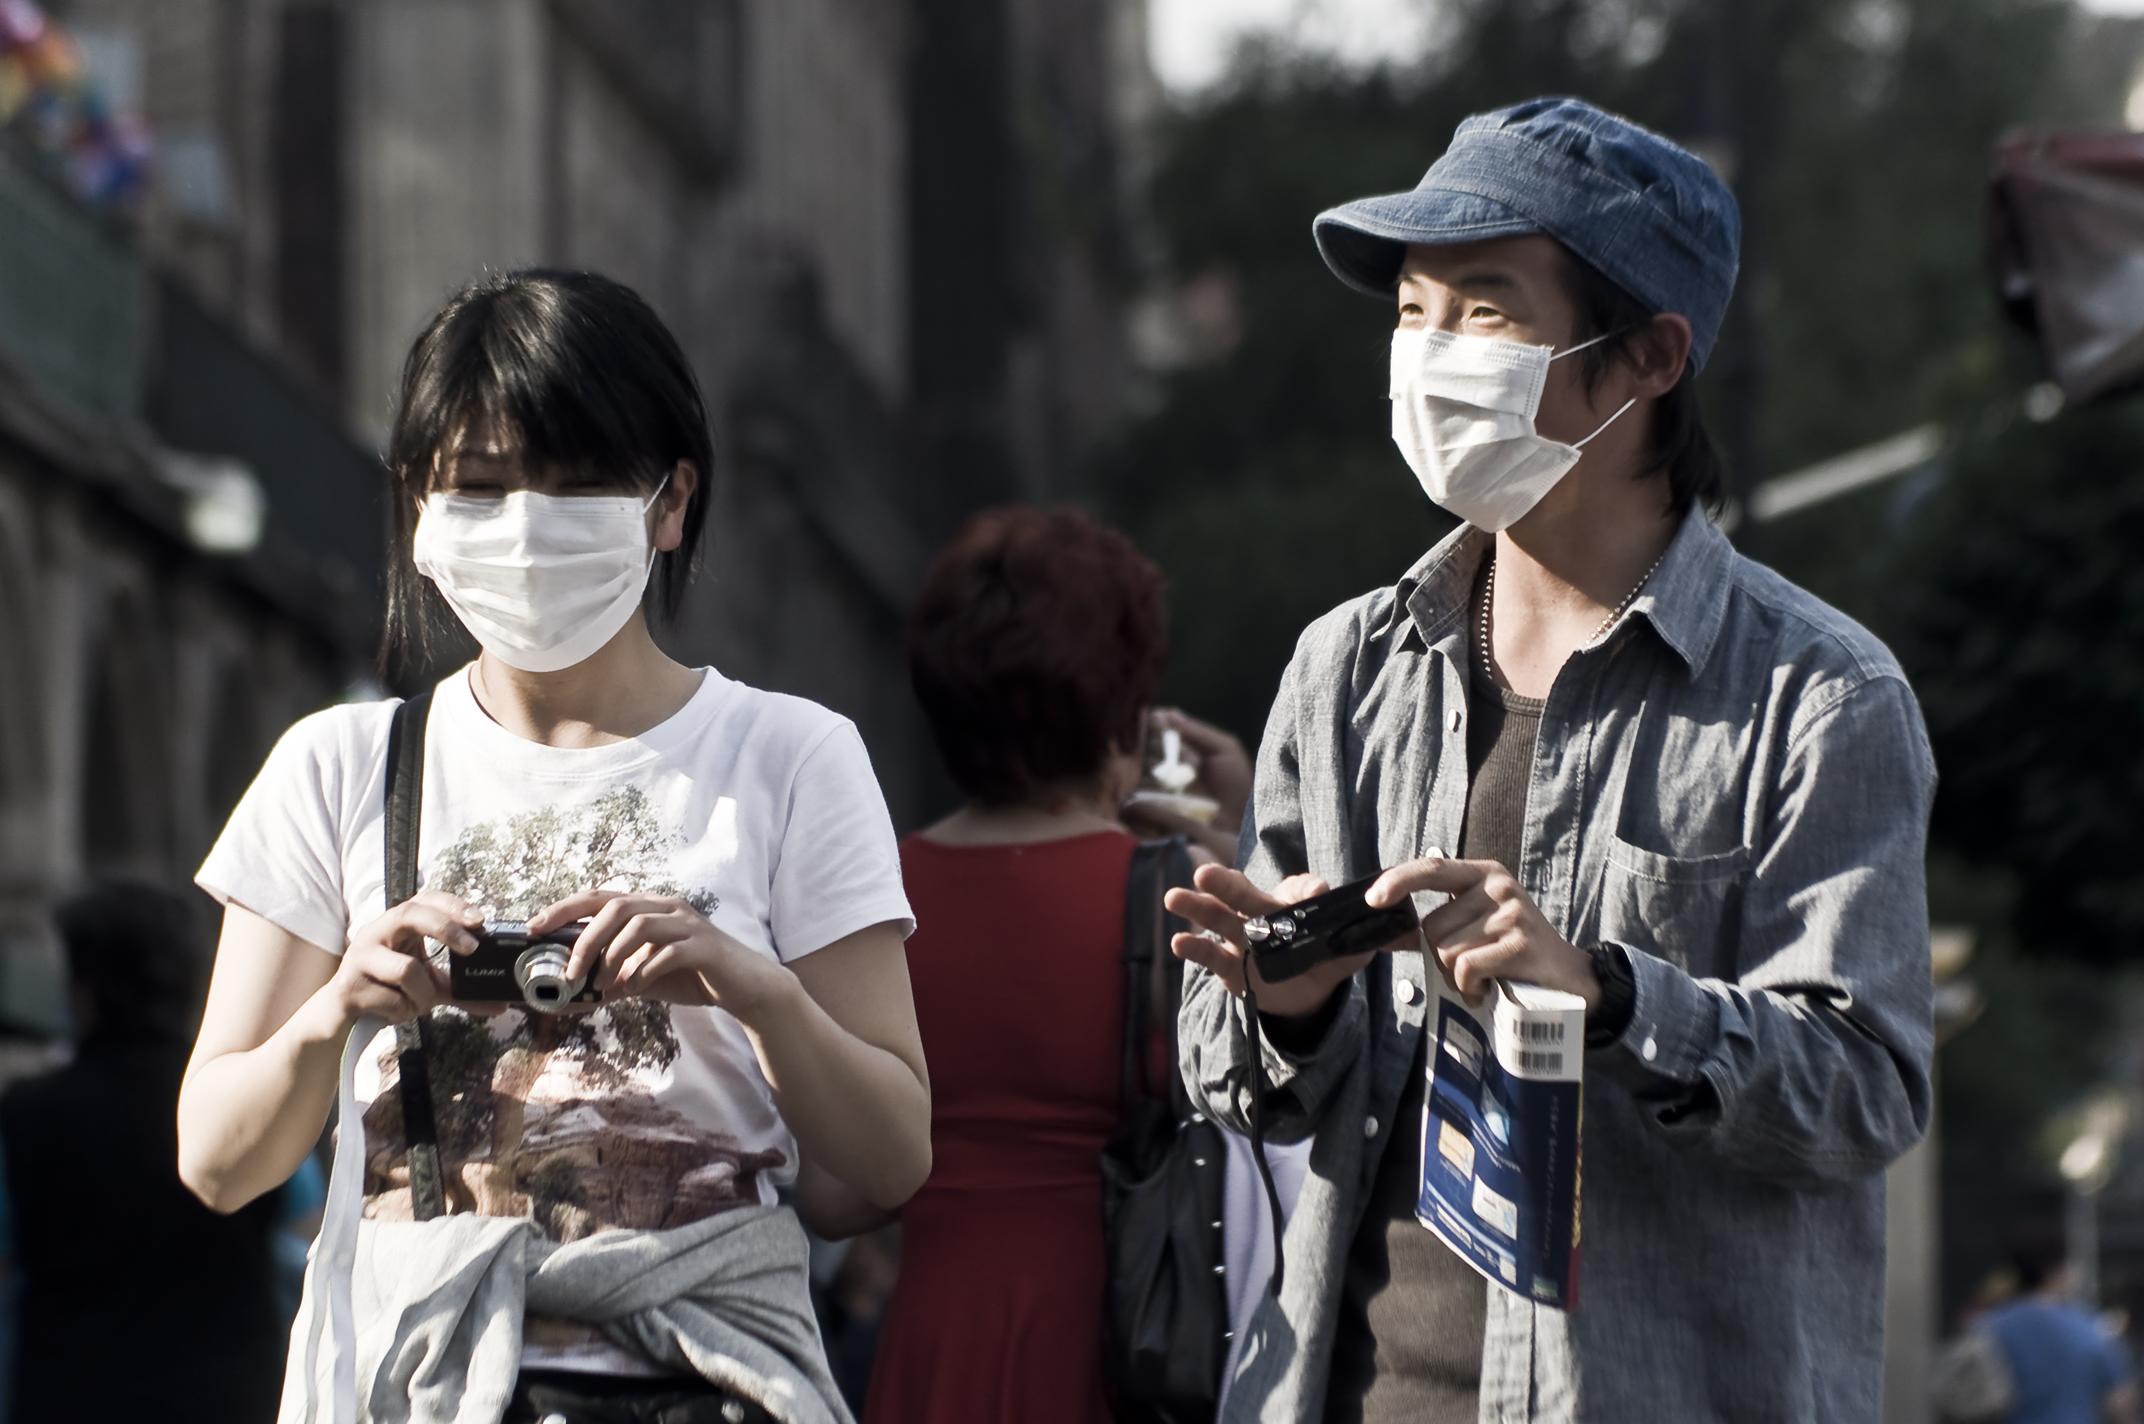 Tourists in Mexico City during the Swine Flu